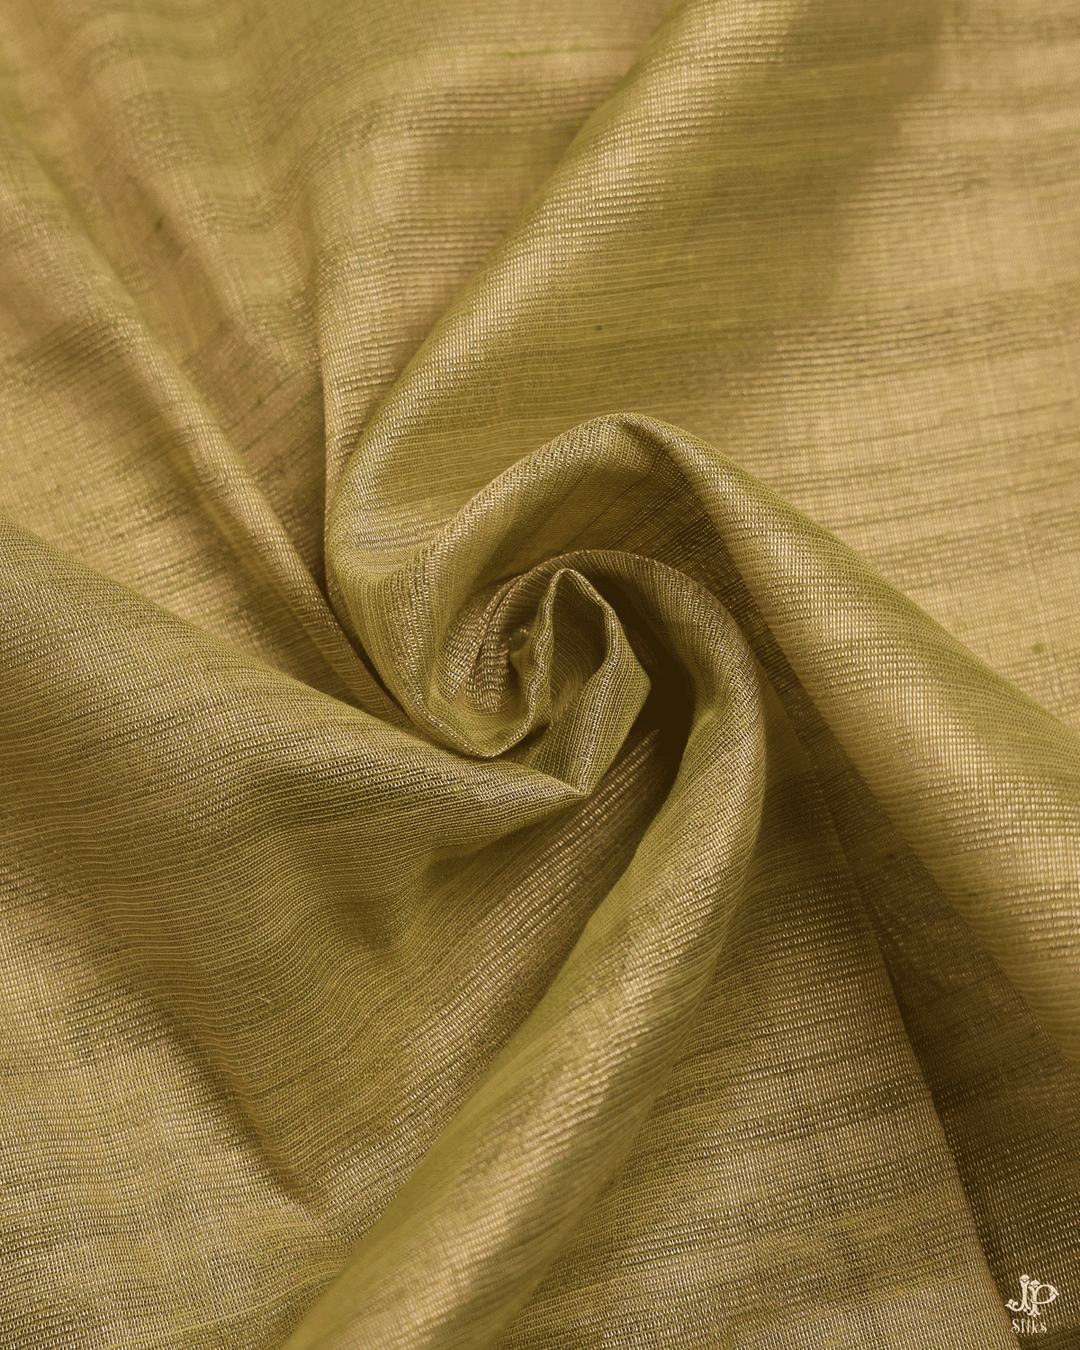 Olive Green Unstitched Chudidhar Material - D5189 -View 3